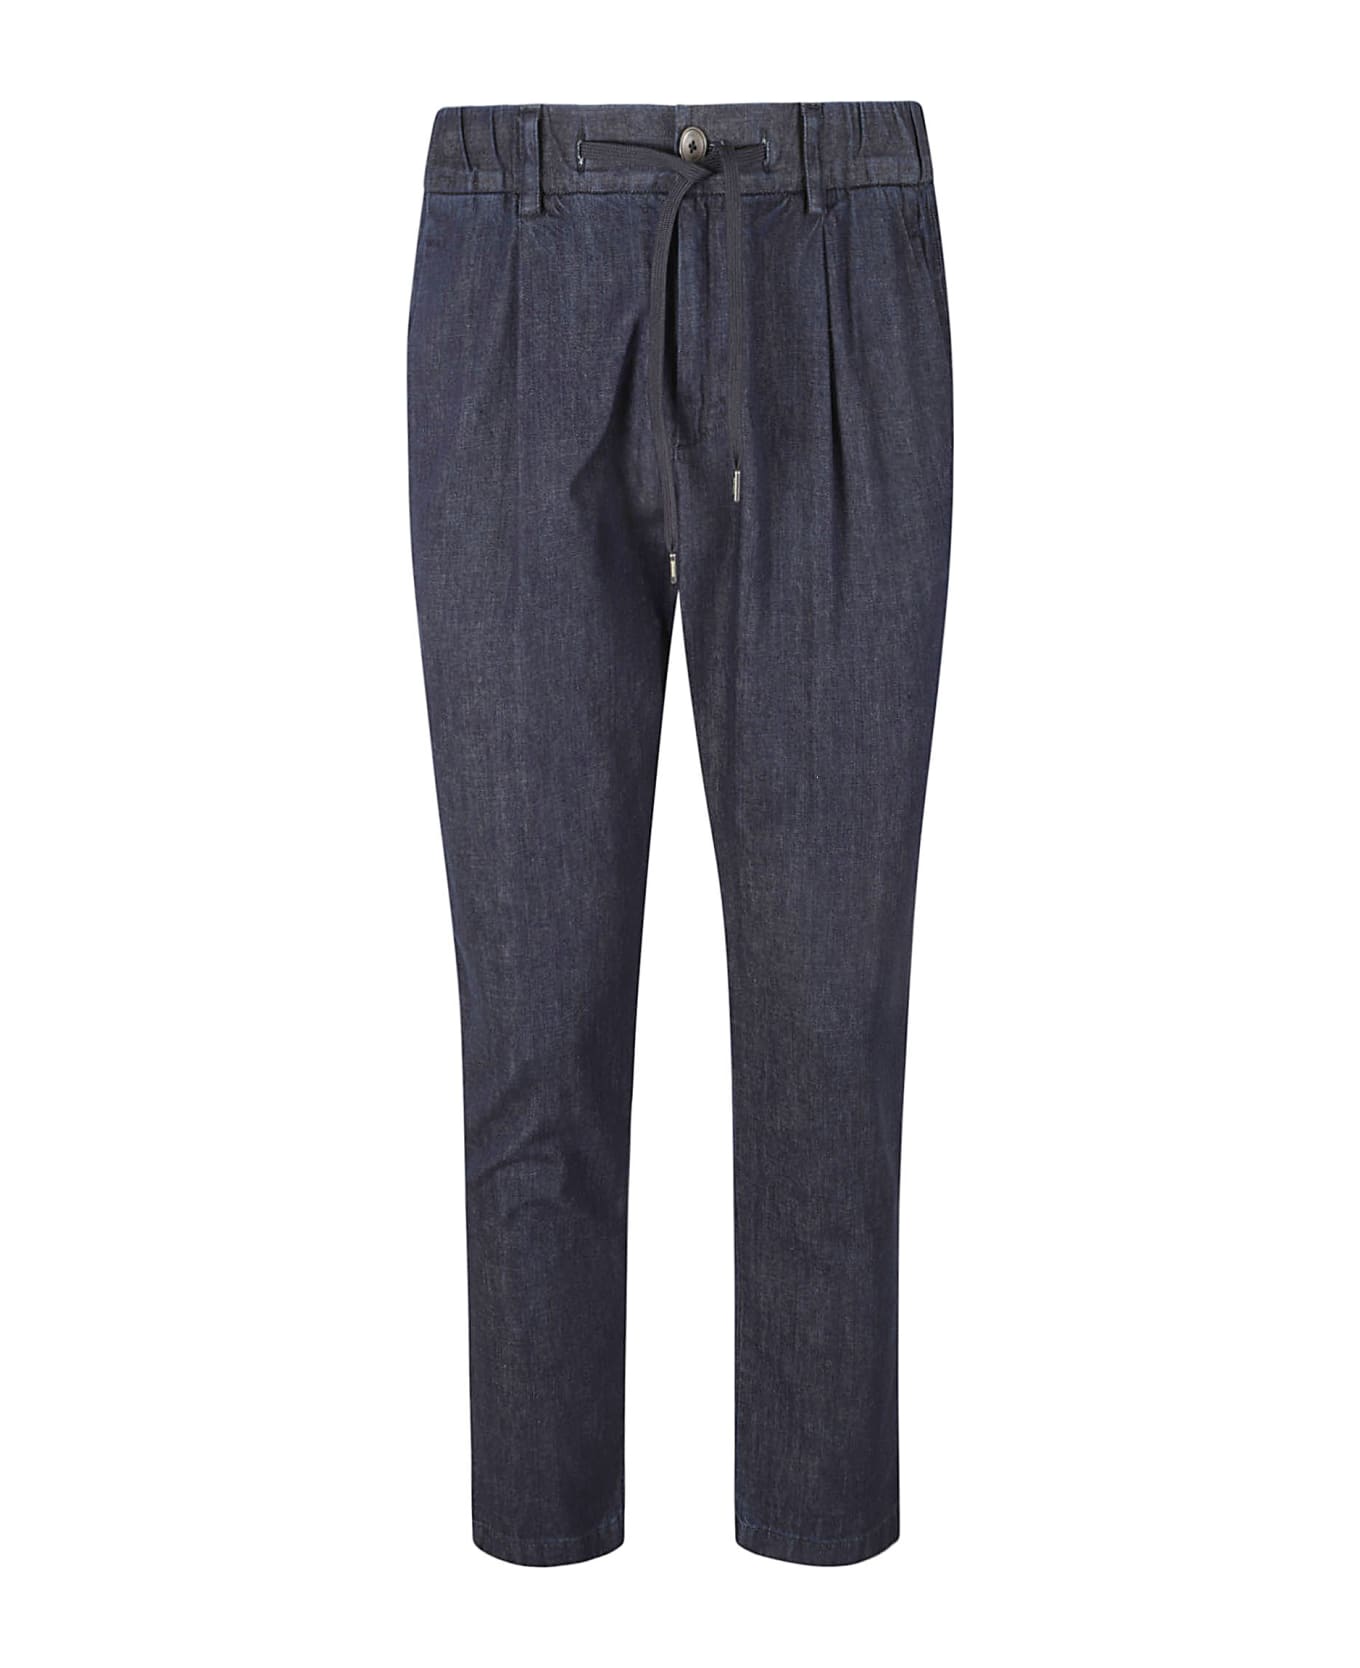 Herno Drawstring Waist Slim Fit Trousers - Blue Navy ボトムス